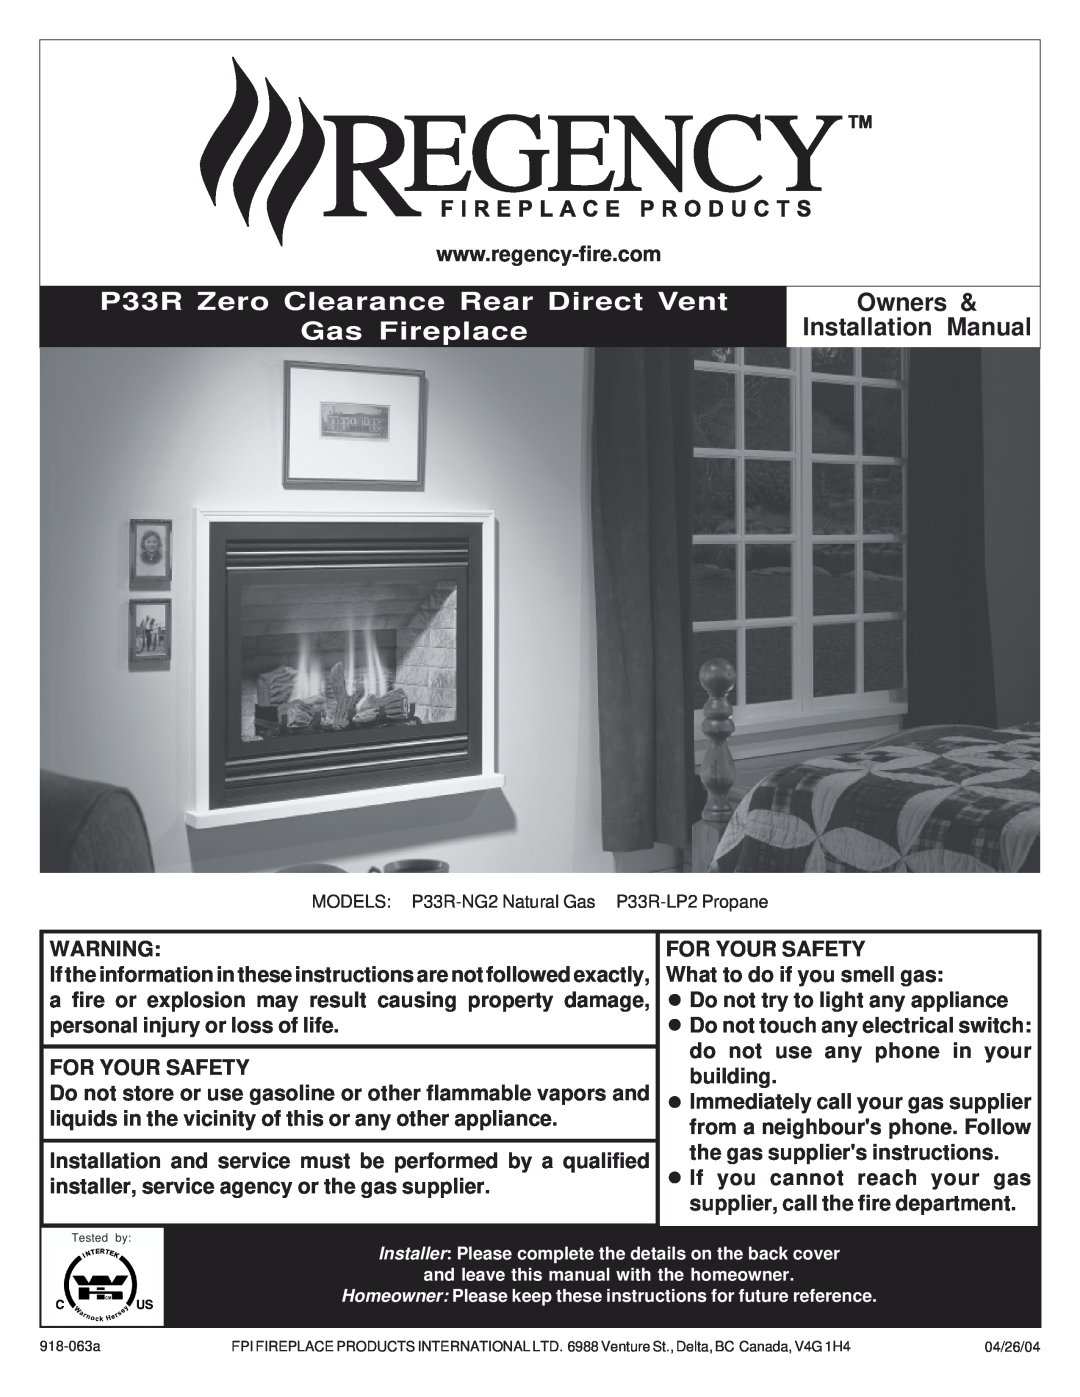 Regency P33R-NG2 installation manual P33R Zero Clearance Rear Direct Vent, Owners, Gas Fireplace, Installation Manual 